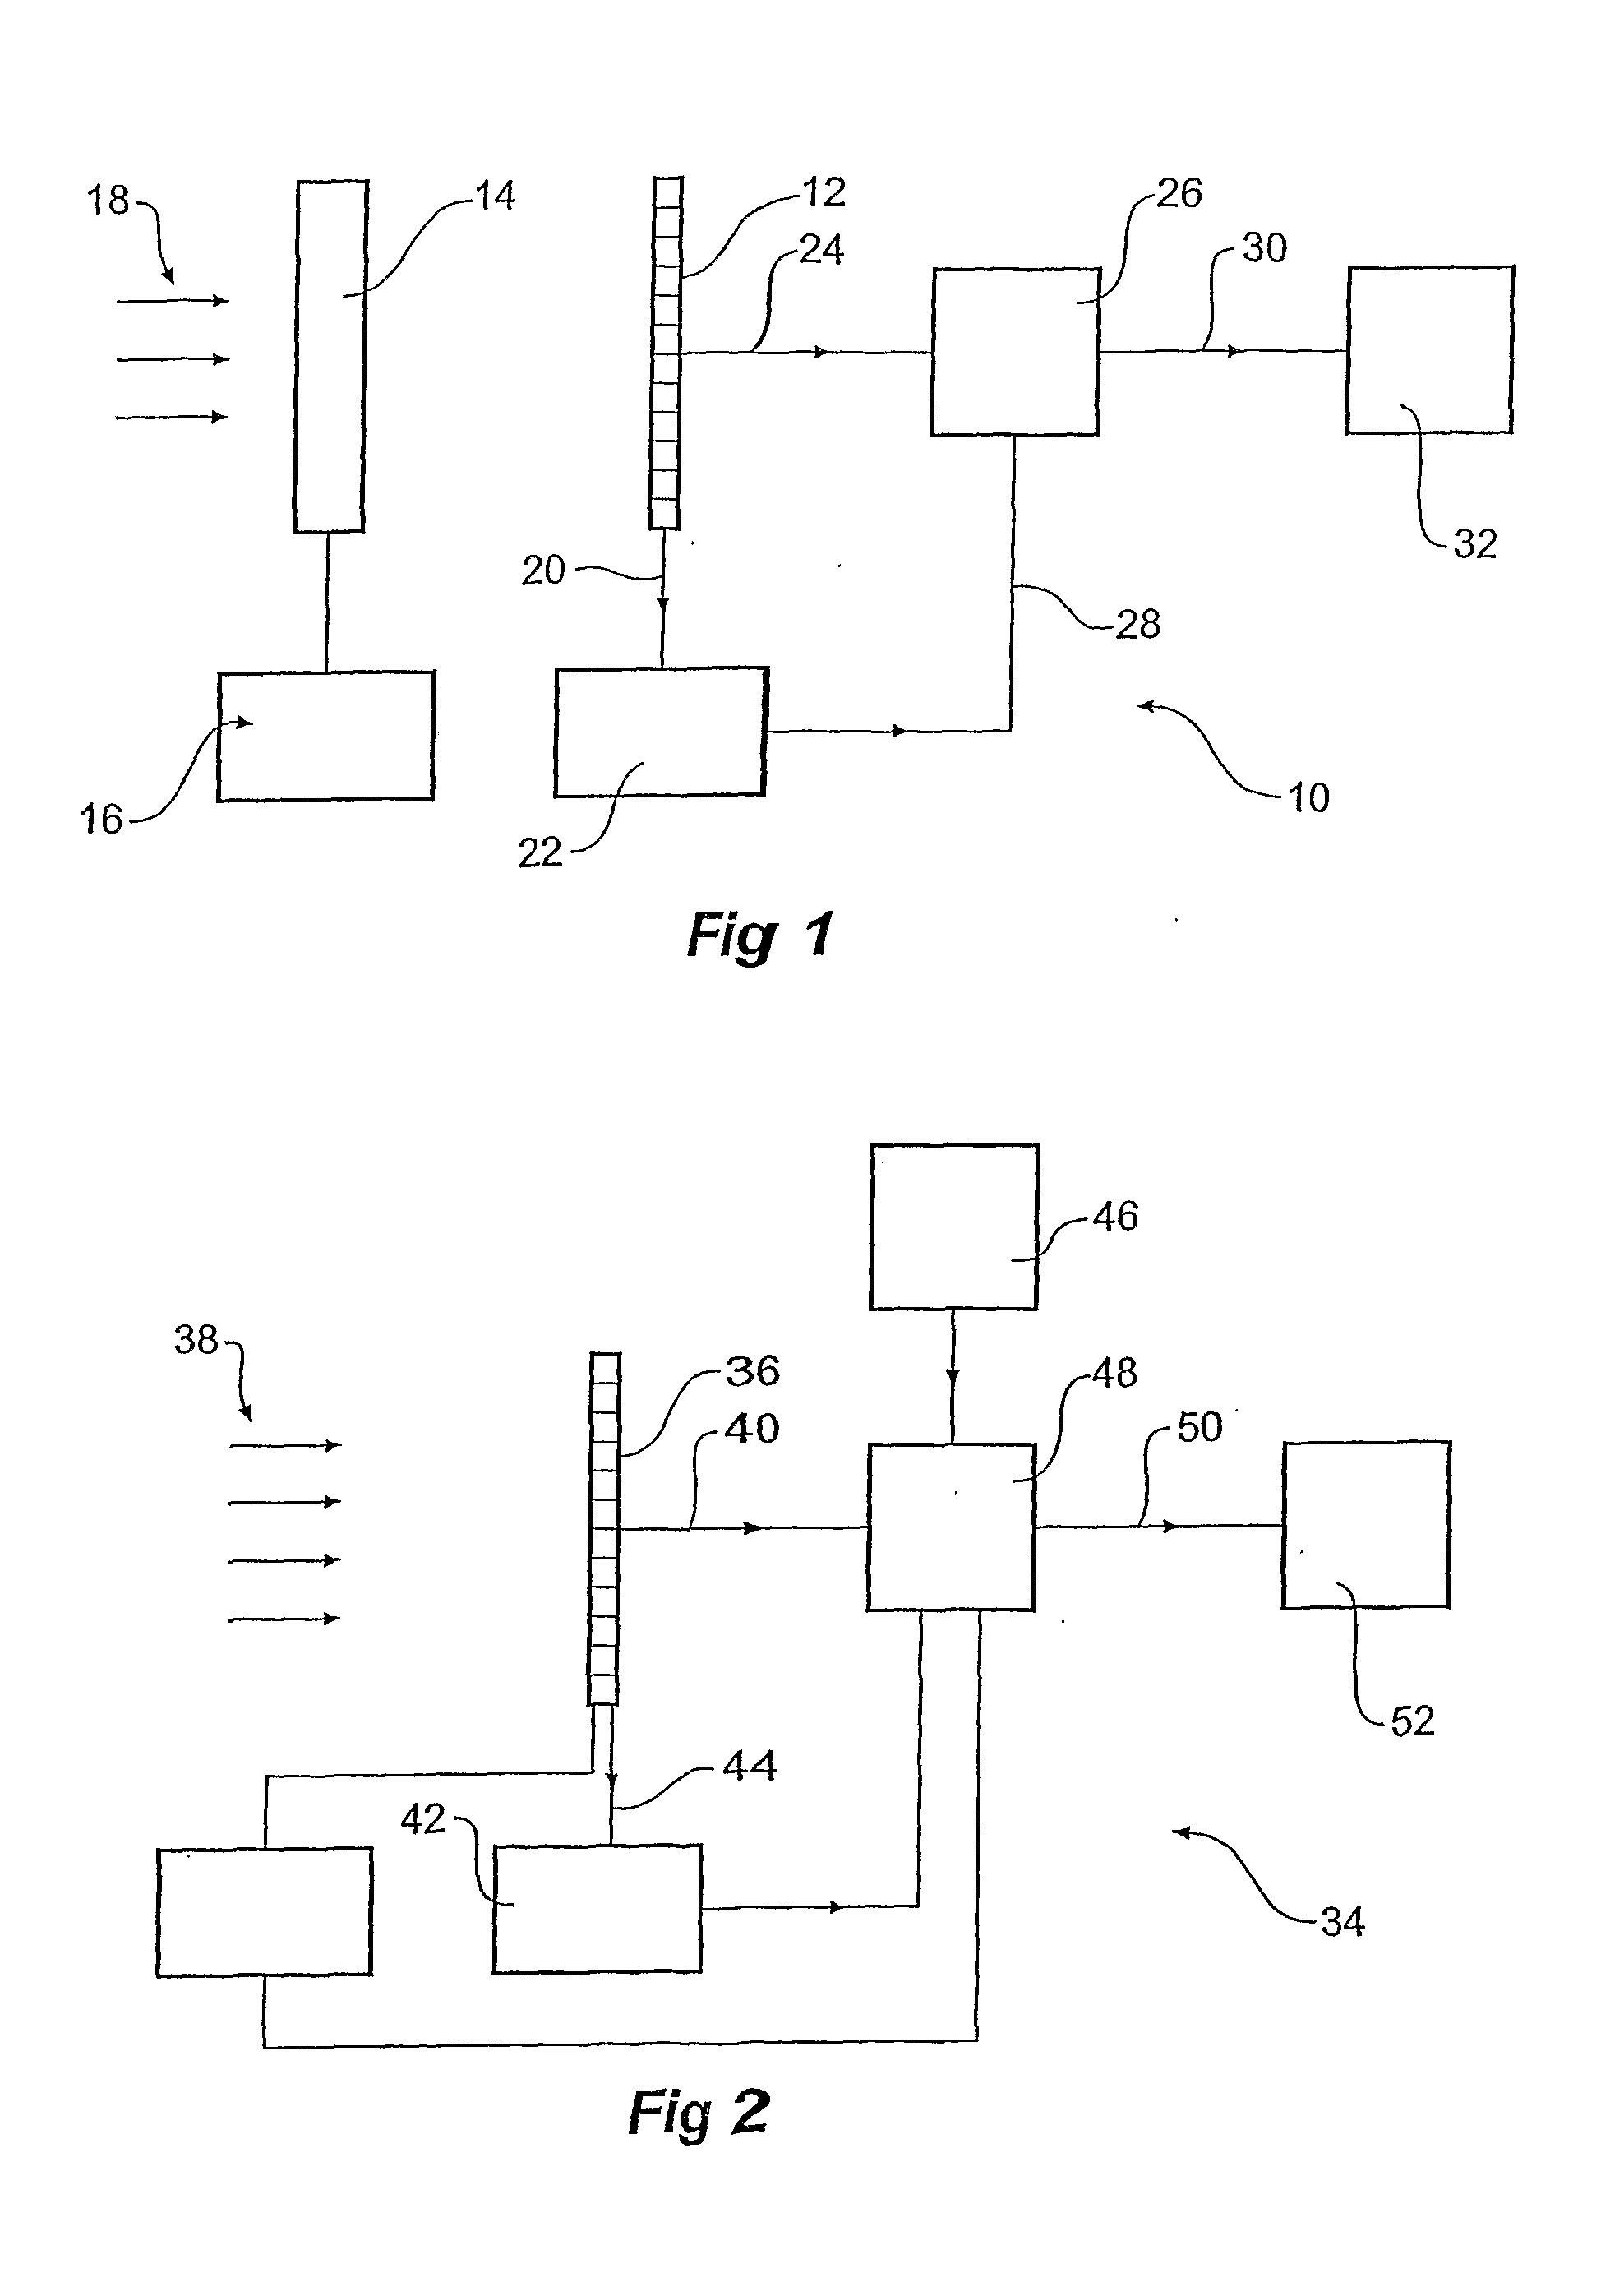 Method for Producing High Signal to Noise Spectral Measurements in Optical Dectector Arrays